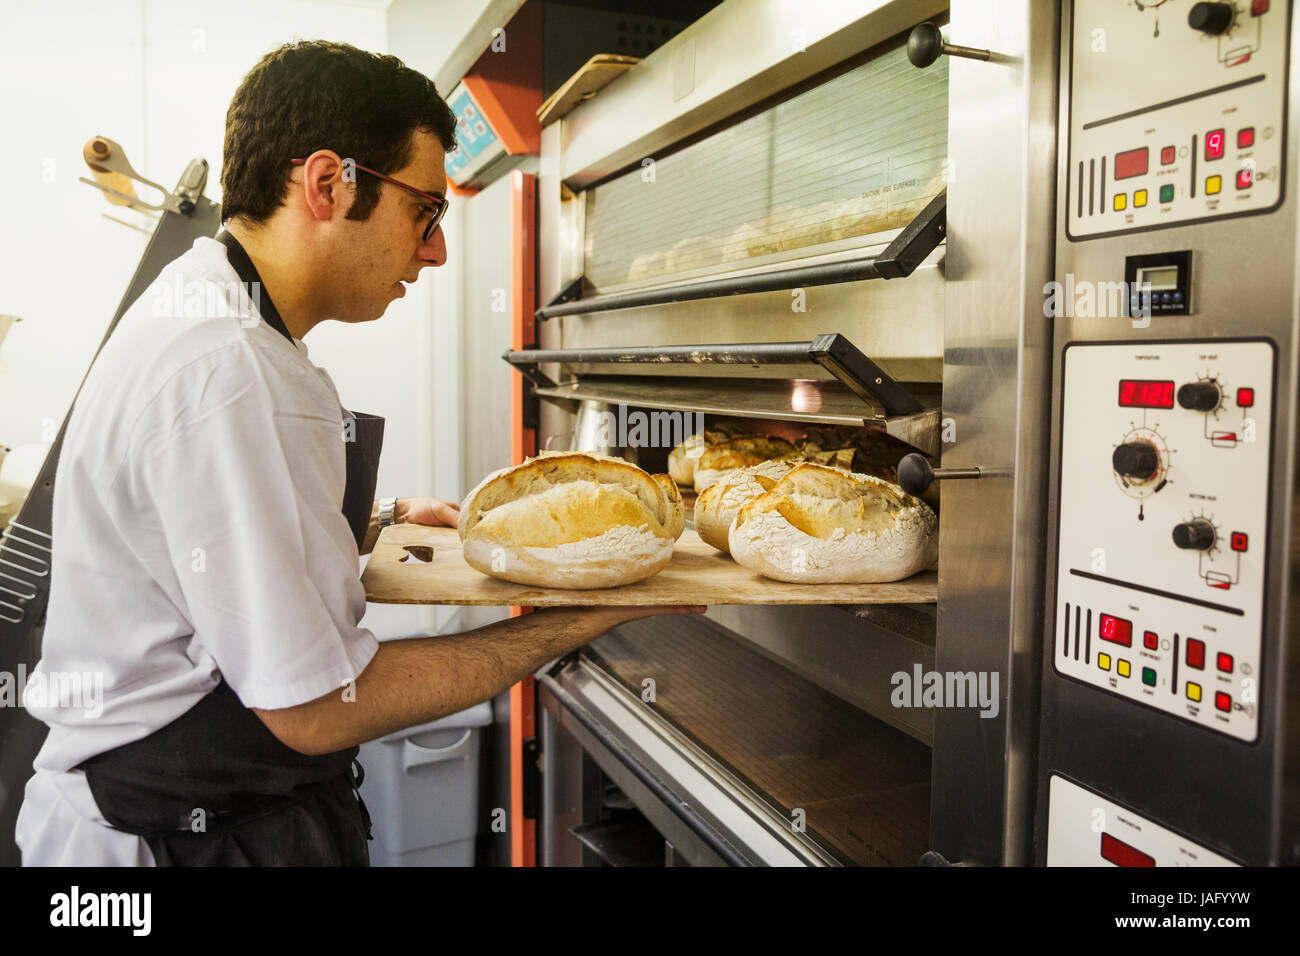 Baker removing tray with freshly baked loaves of bread from the oven Stock Photo